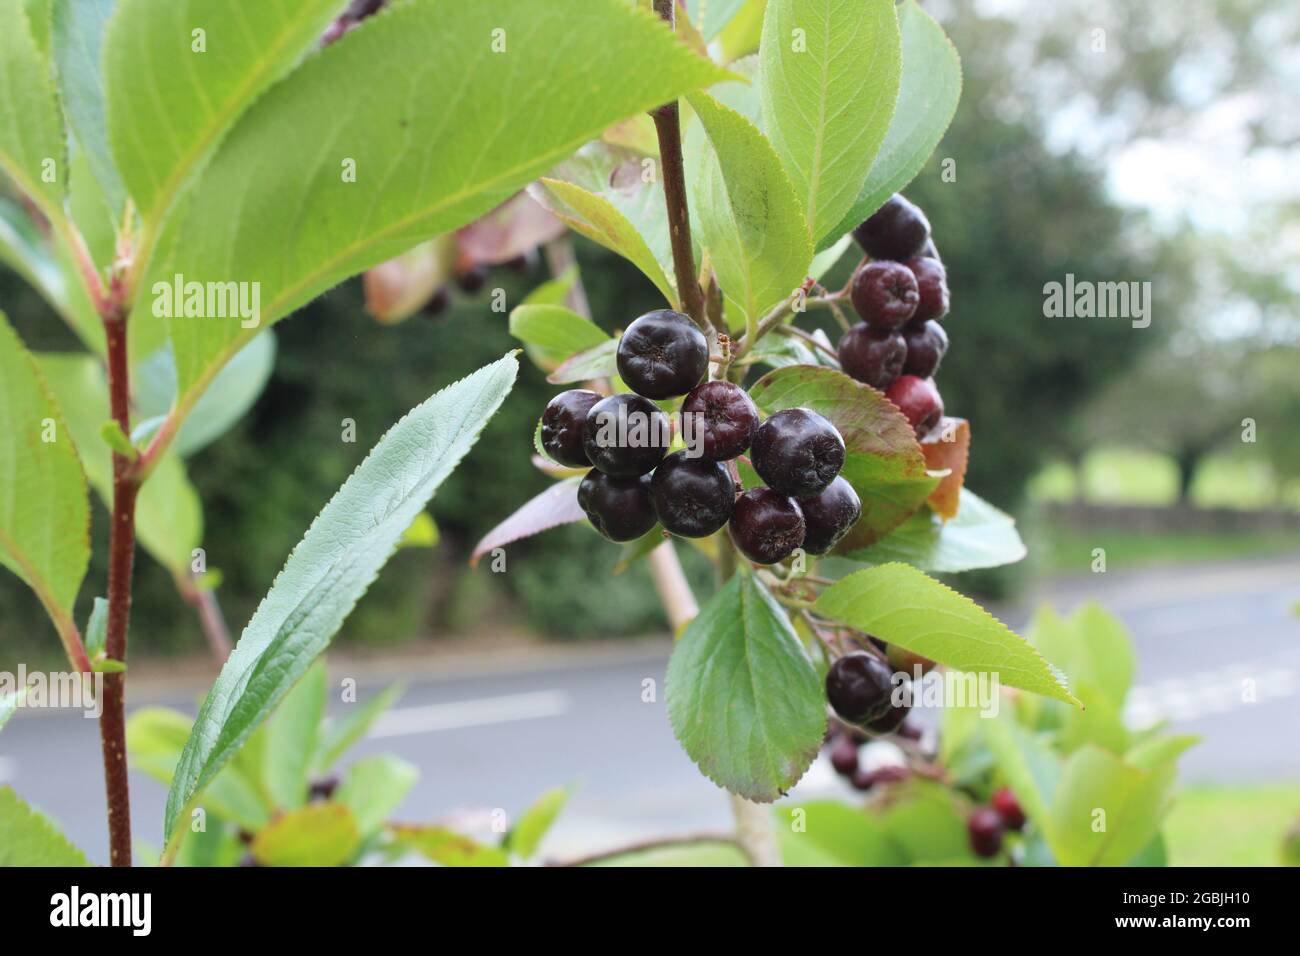 Aronia berry plant with fruit also known as Chokeberry due the astringency of the fruit Stock Photo